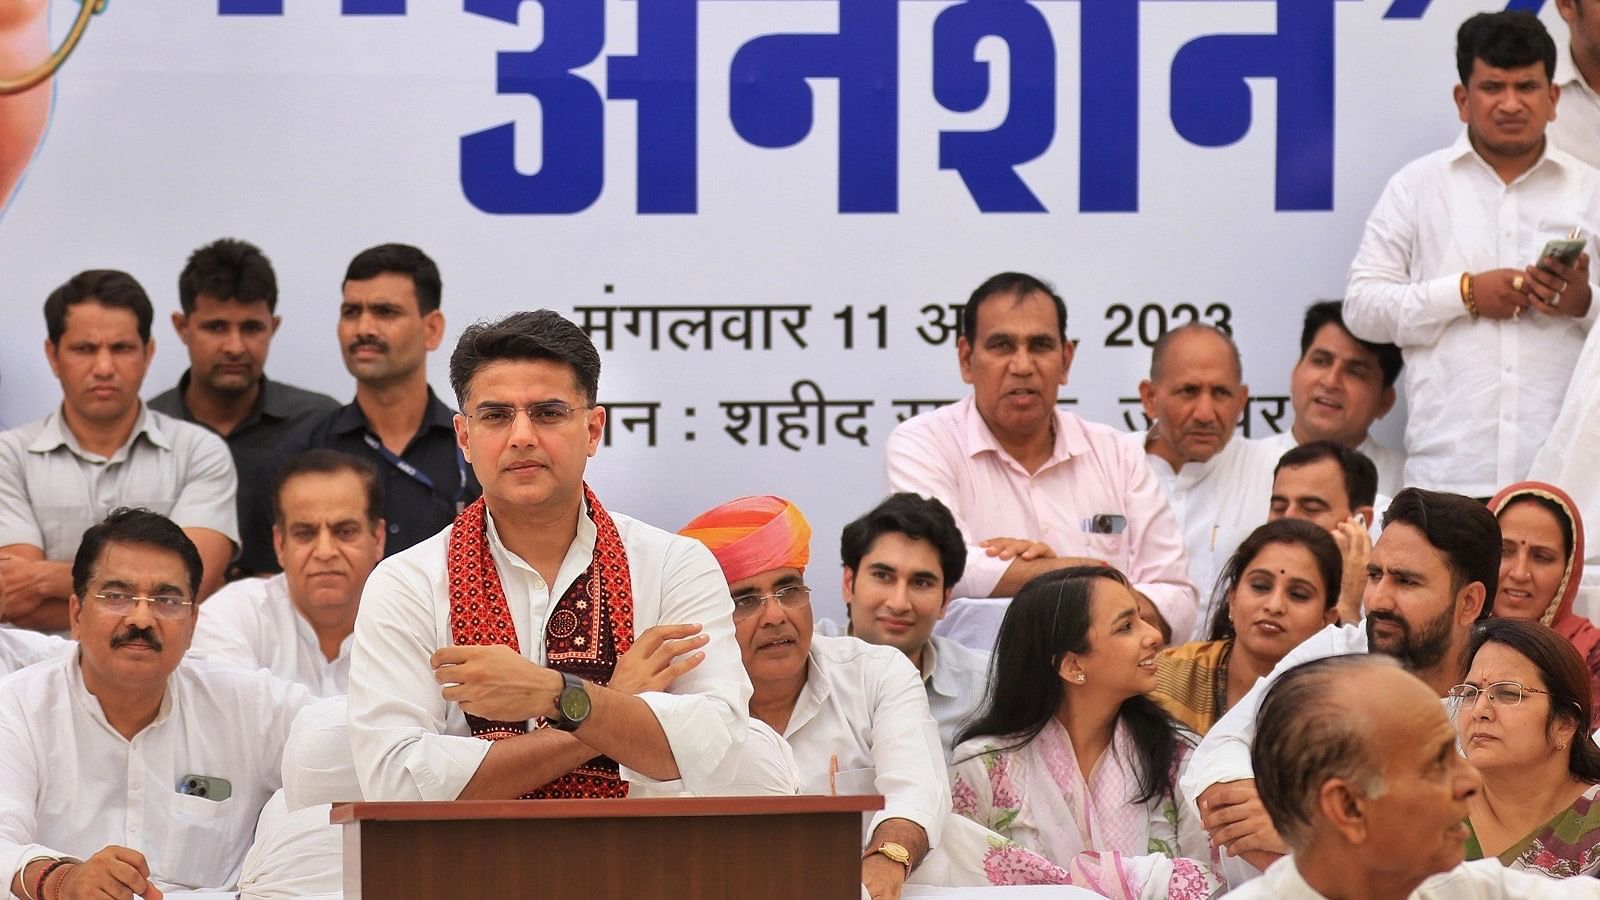 <div class="paragraphs"><p>Congress leader Sachin Pilot and his supporters during a hunger strike in Jaipur on Tuesday, 11 April.&nbsp;</p></div>